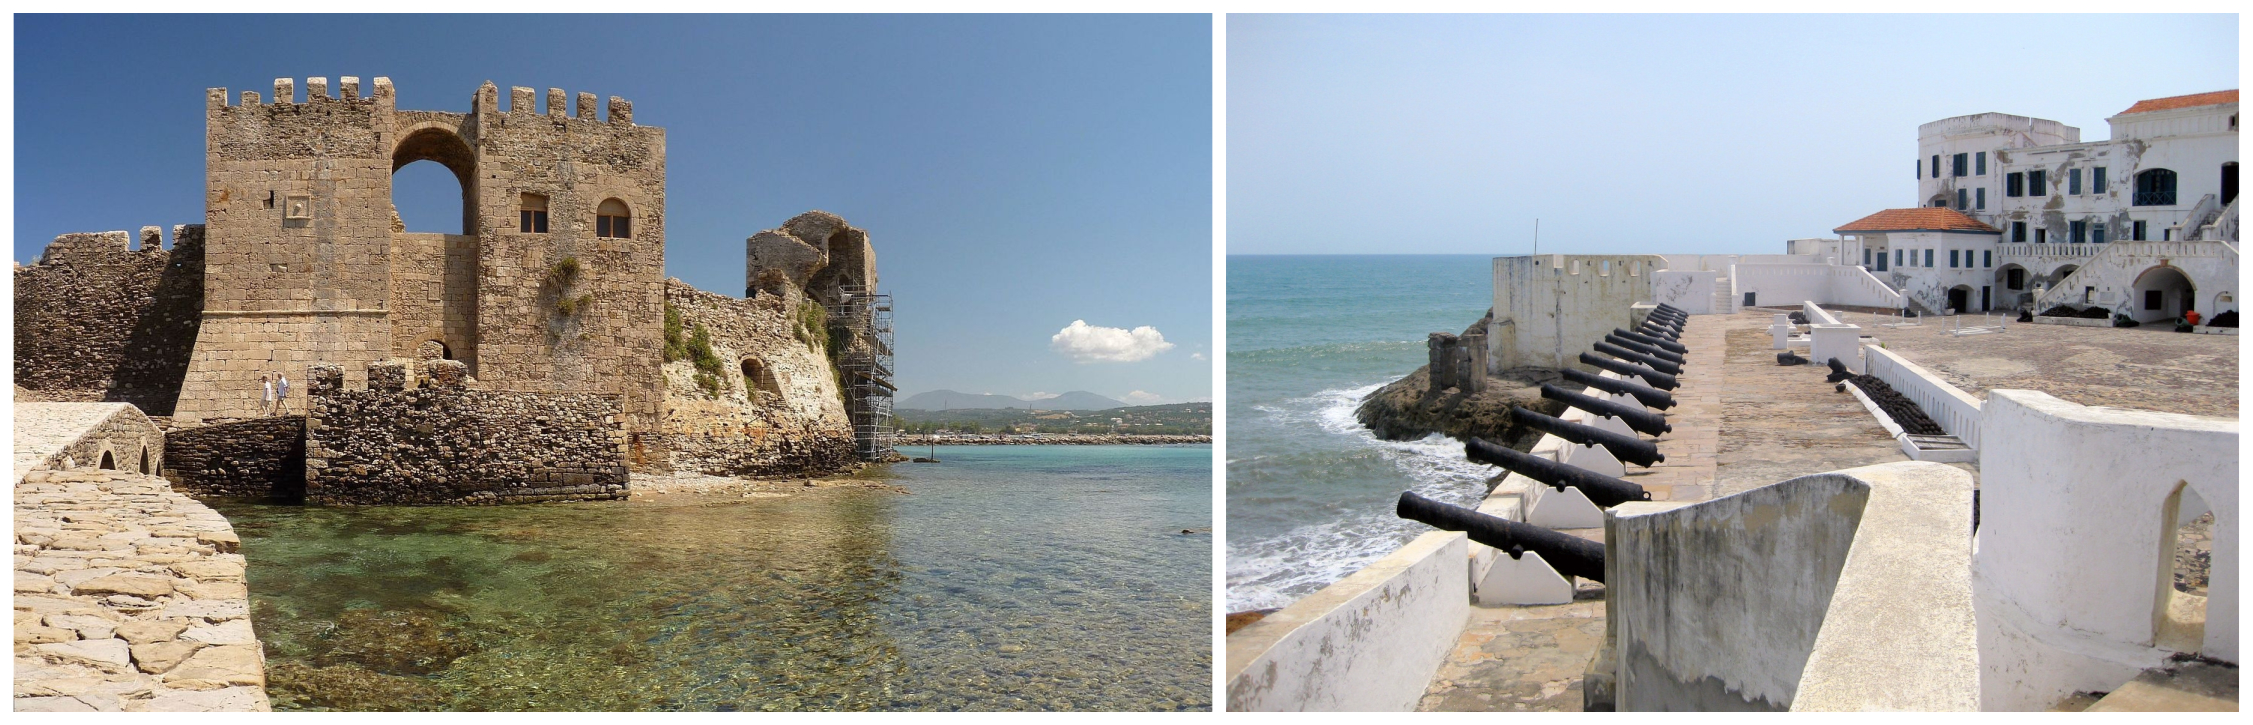 Two photos of castles on the coast, one in grey stone and one in white plaster with cannons facing the sea